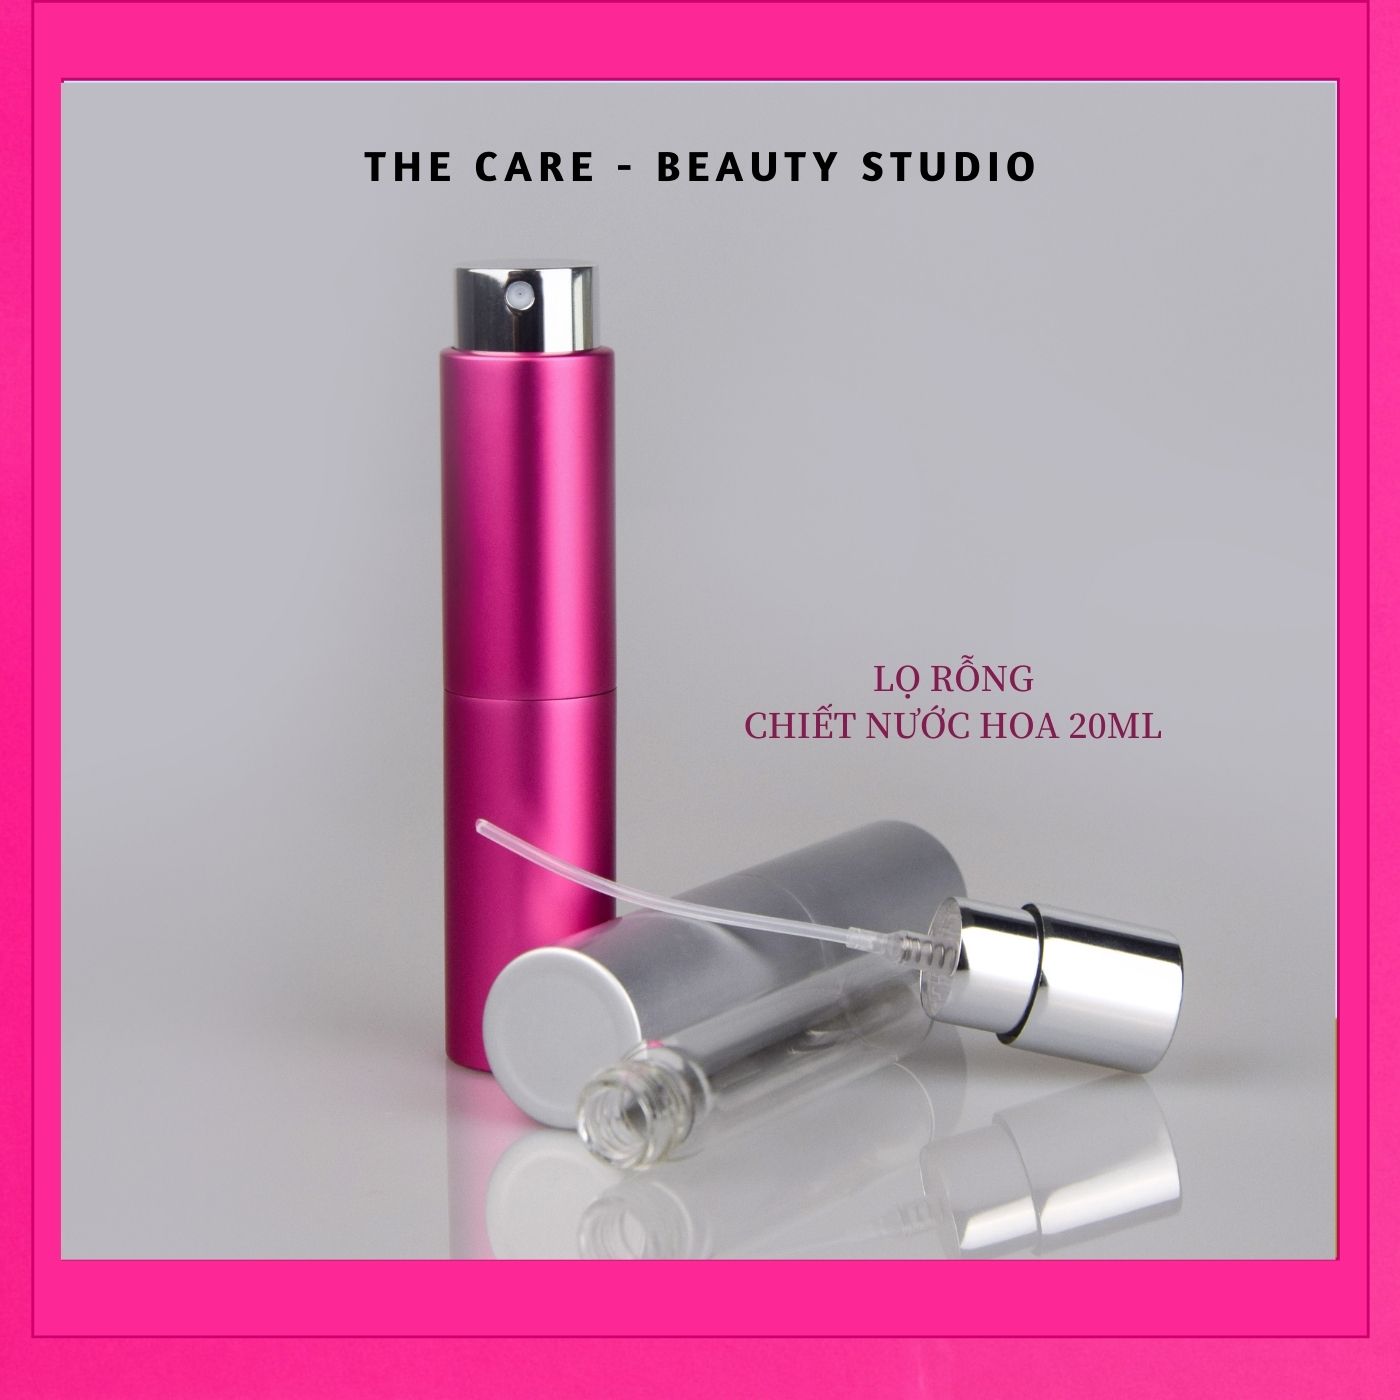 Refill perfume bottle with nice design that can contain skincare liquid